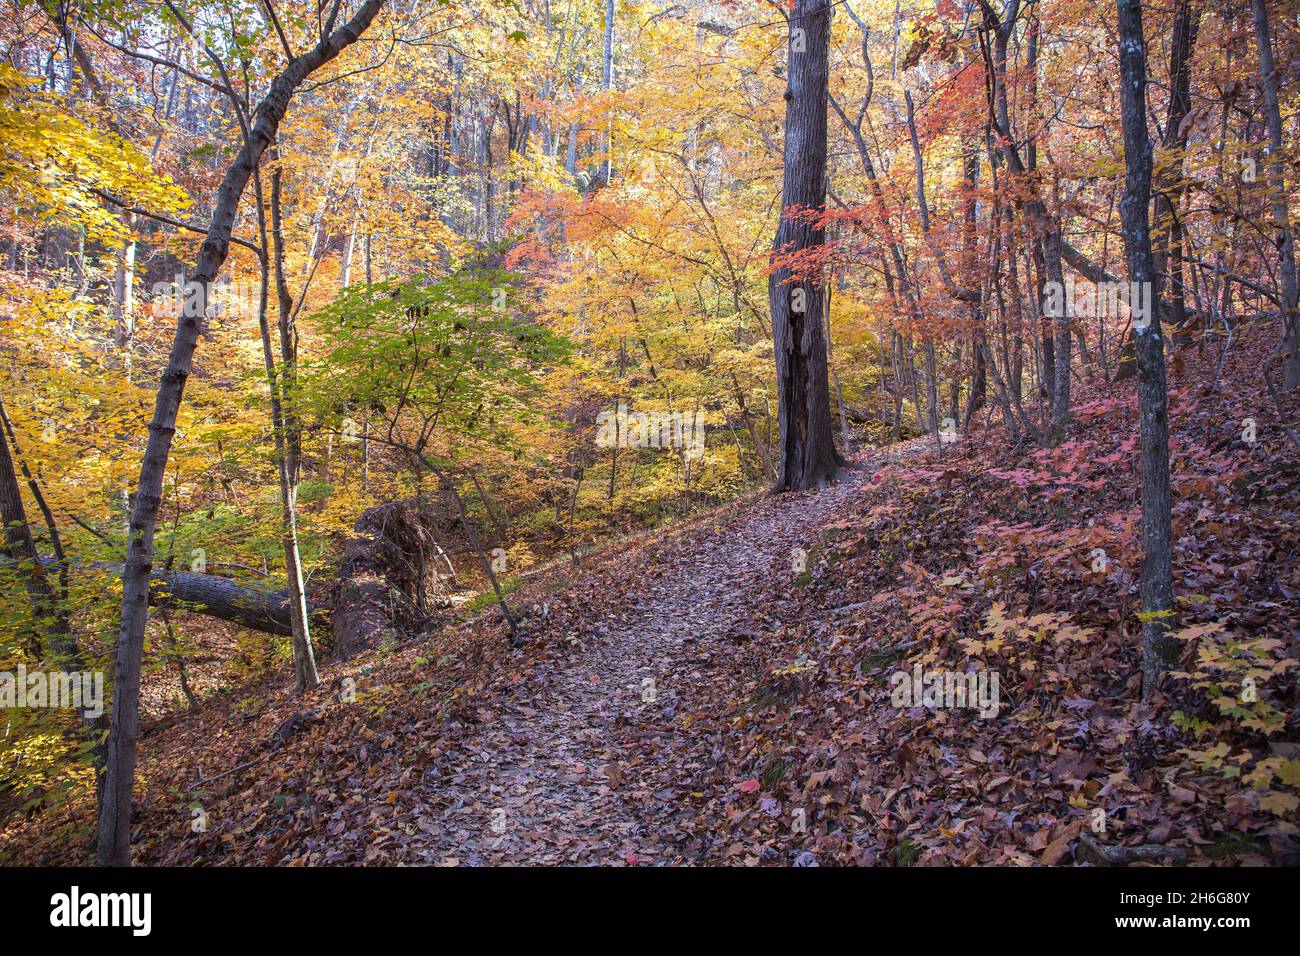 A hiking trail in a nature preserve winds through colorful trees in autumn. Stock Photo